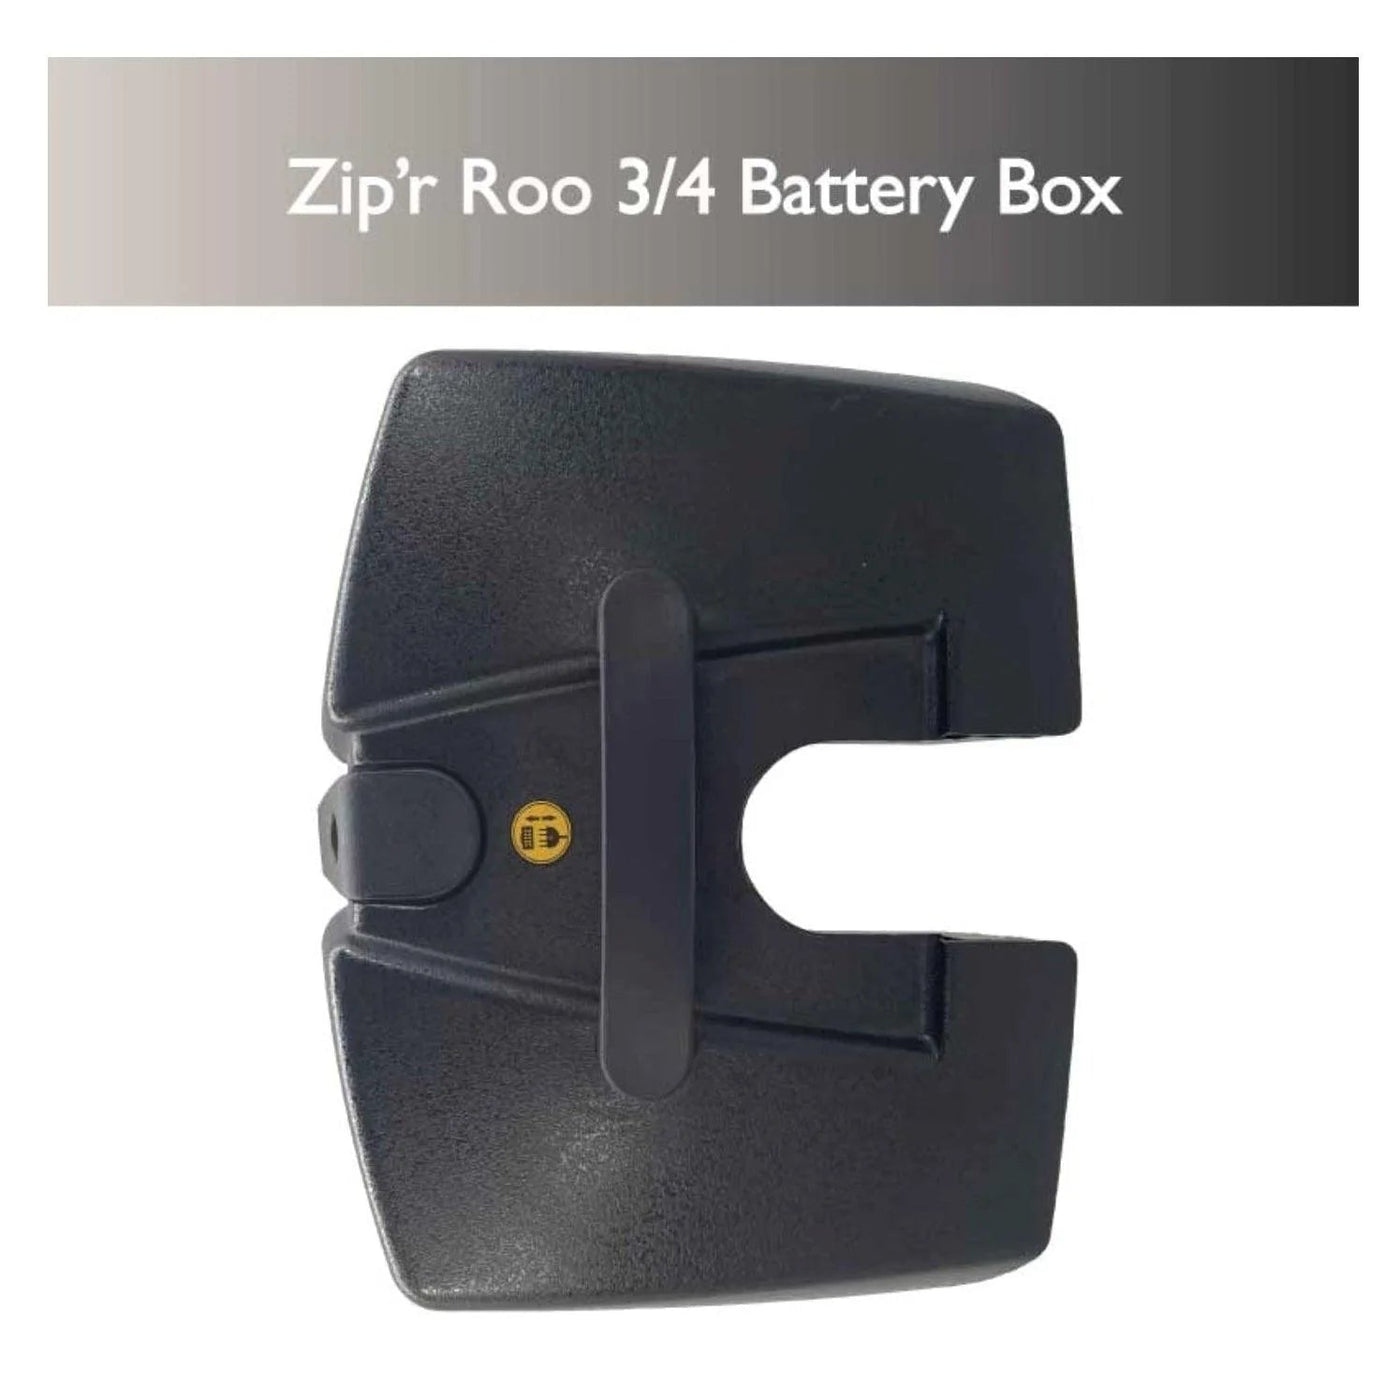 Zip'r Mobility Scooter Battery Box Assembly for Zipr Roo - eBike Haul